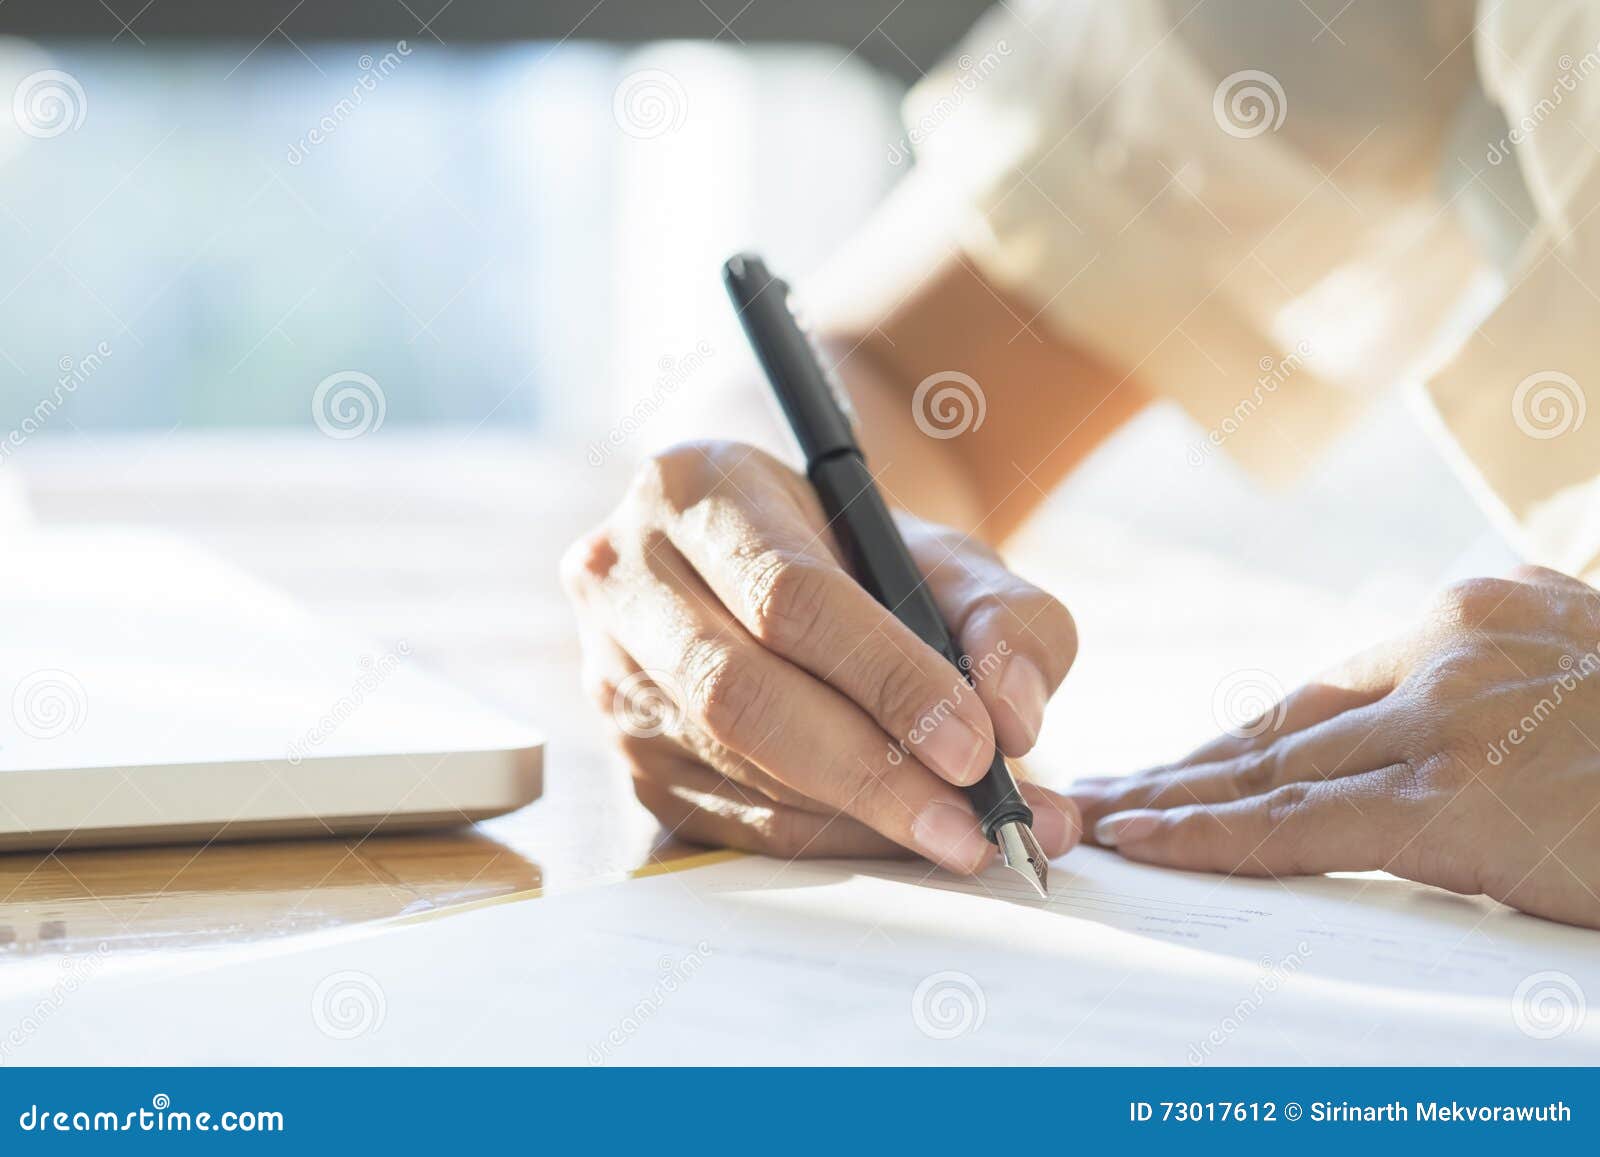 business woman signing a contract document making a deal.